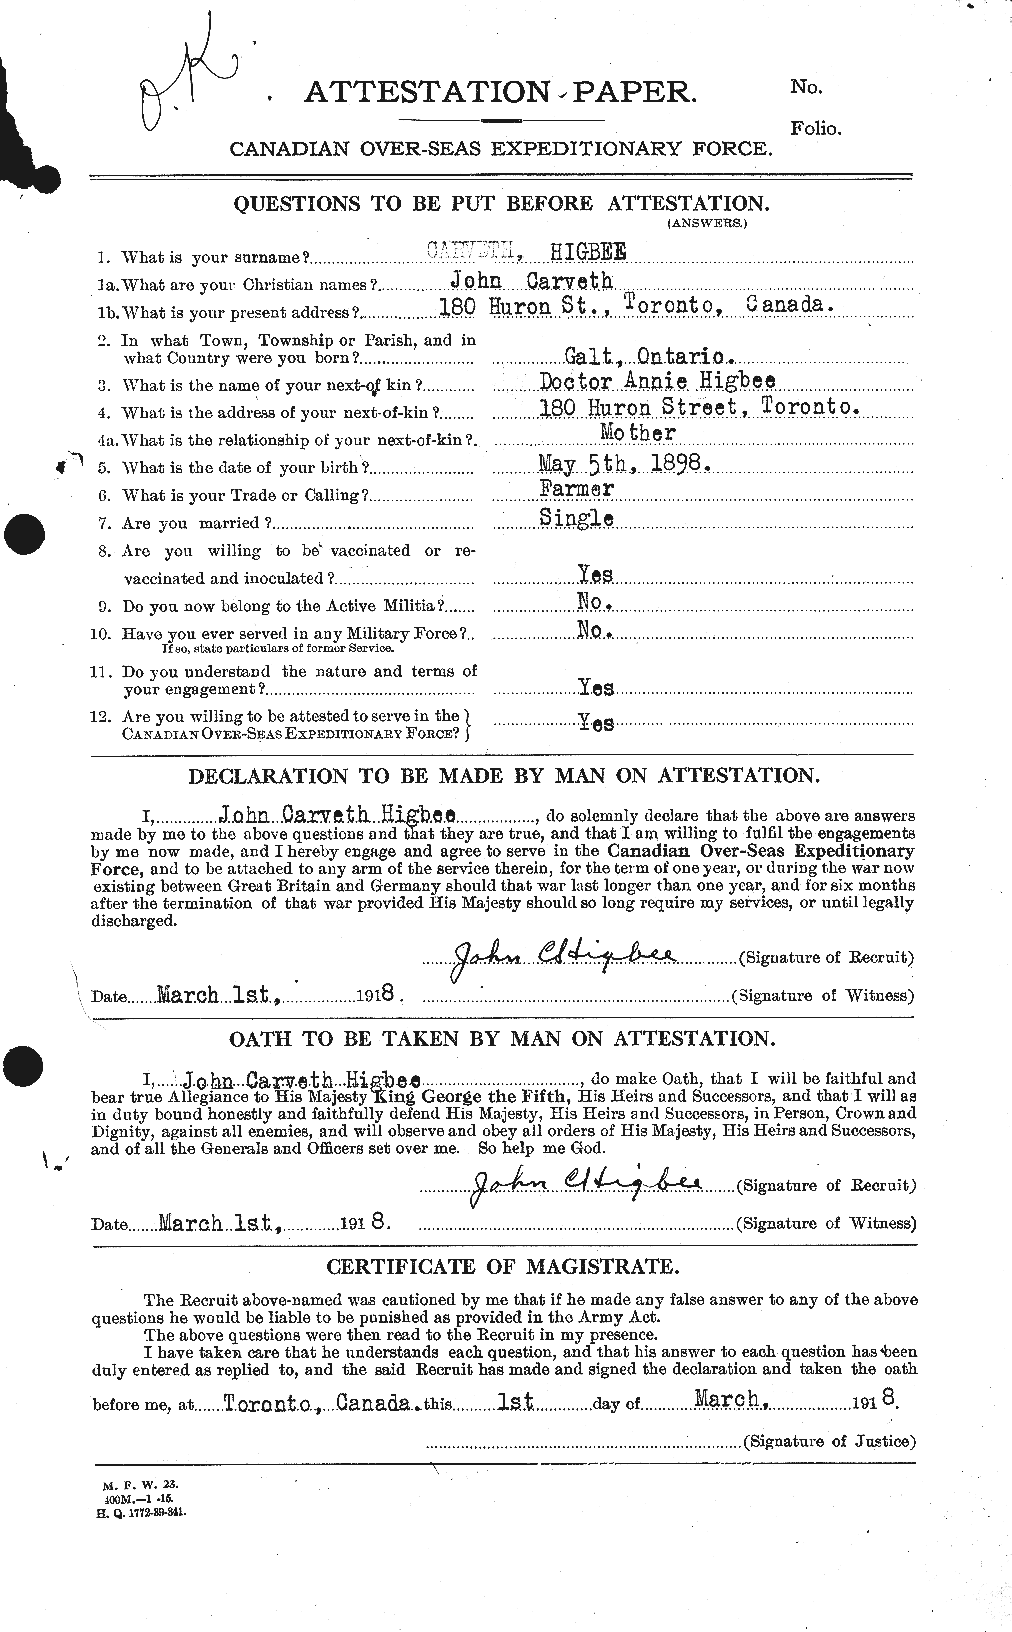 Personnel Records of the First World War - CEF 391763a